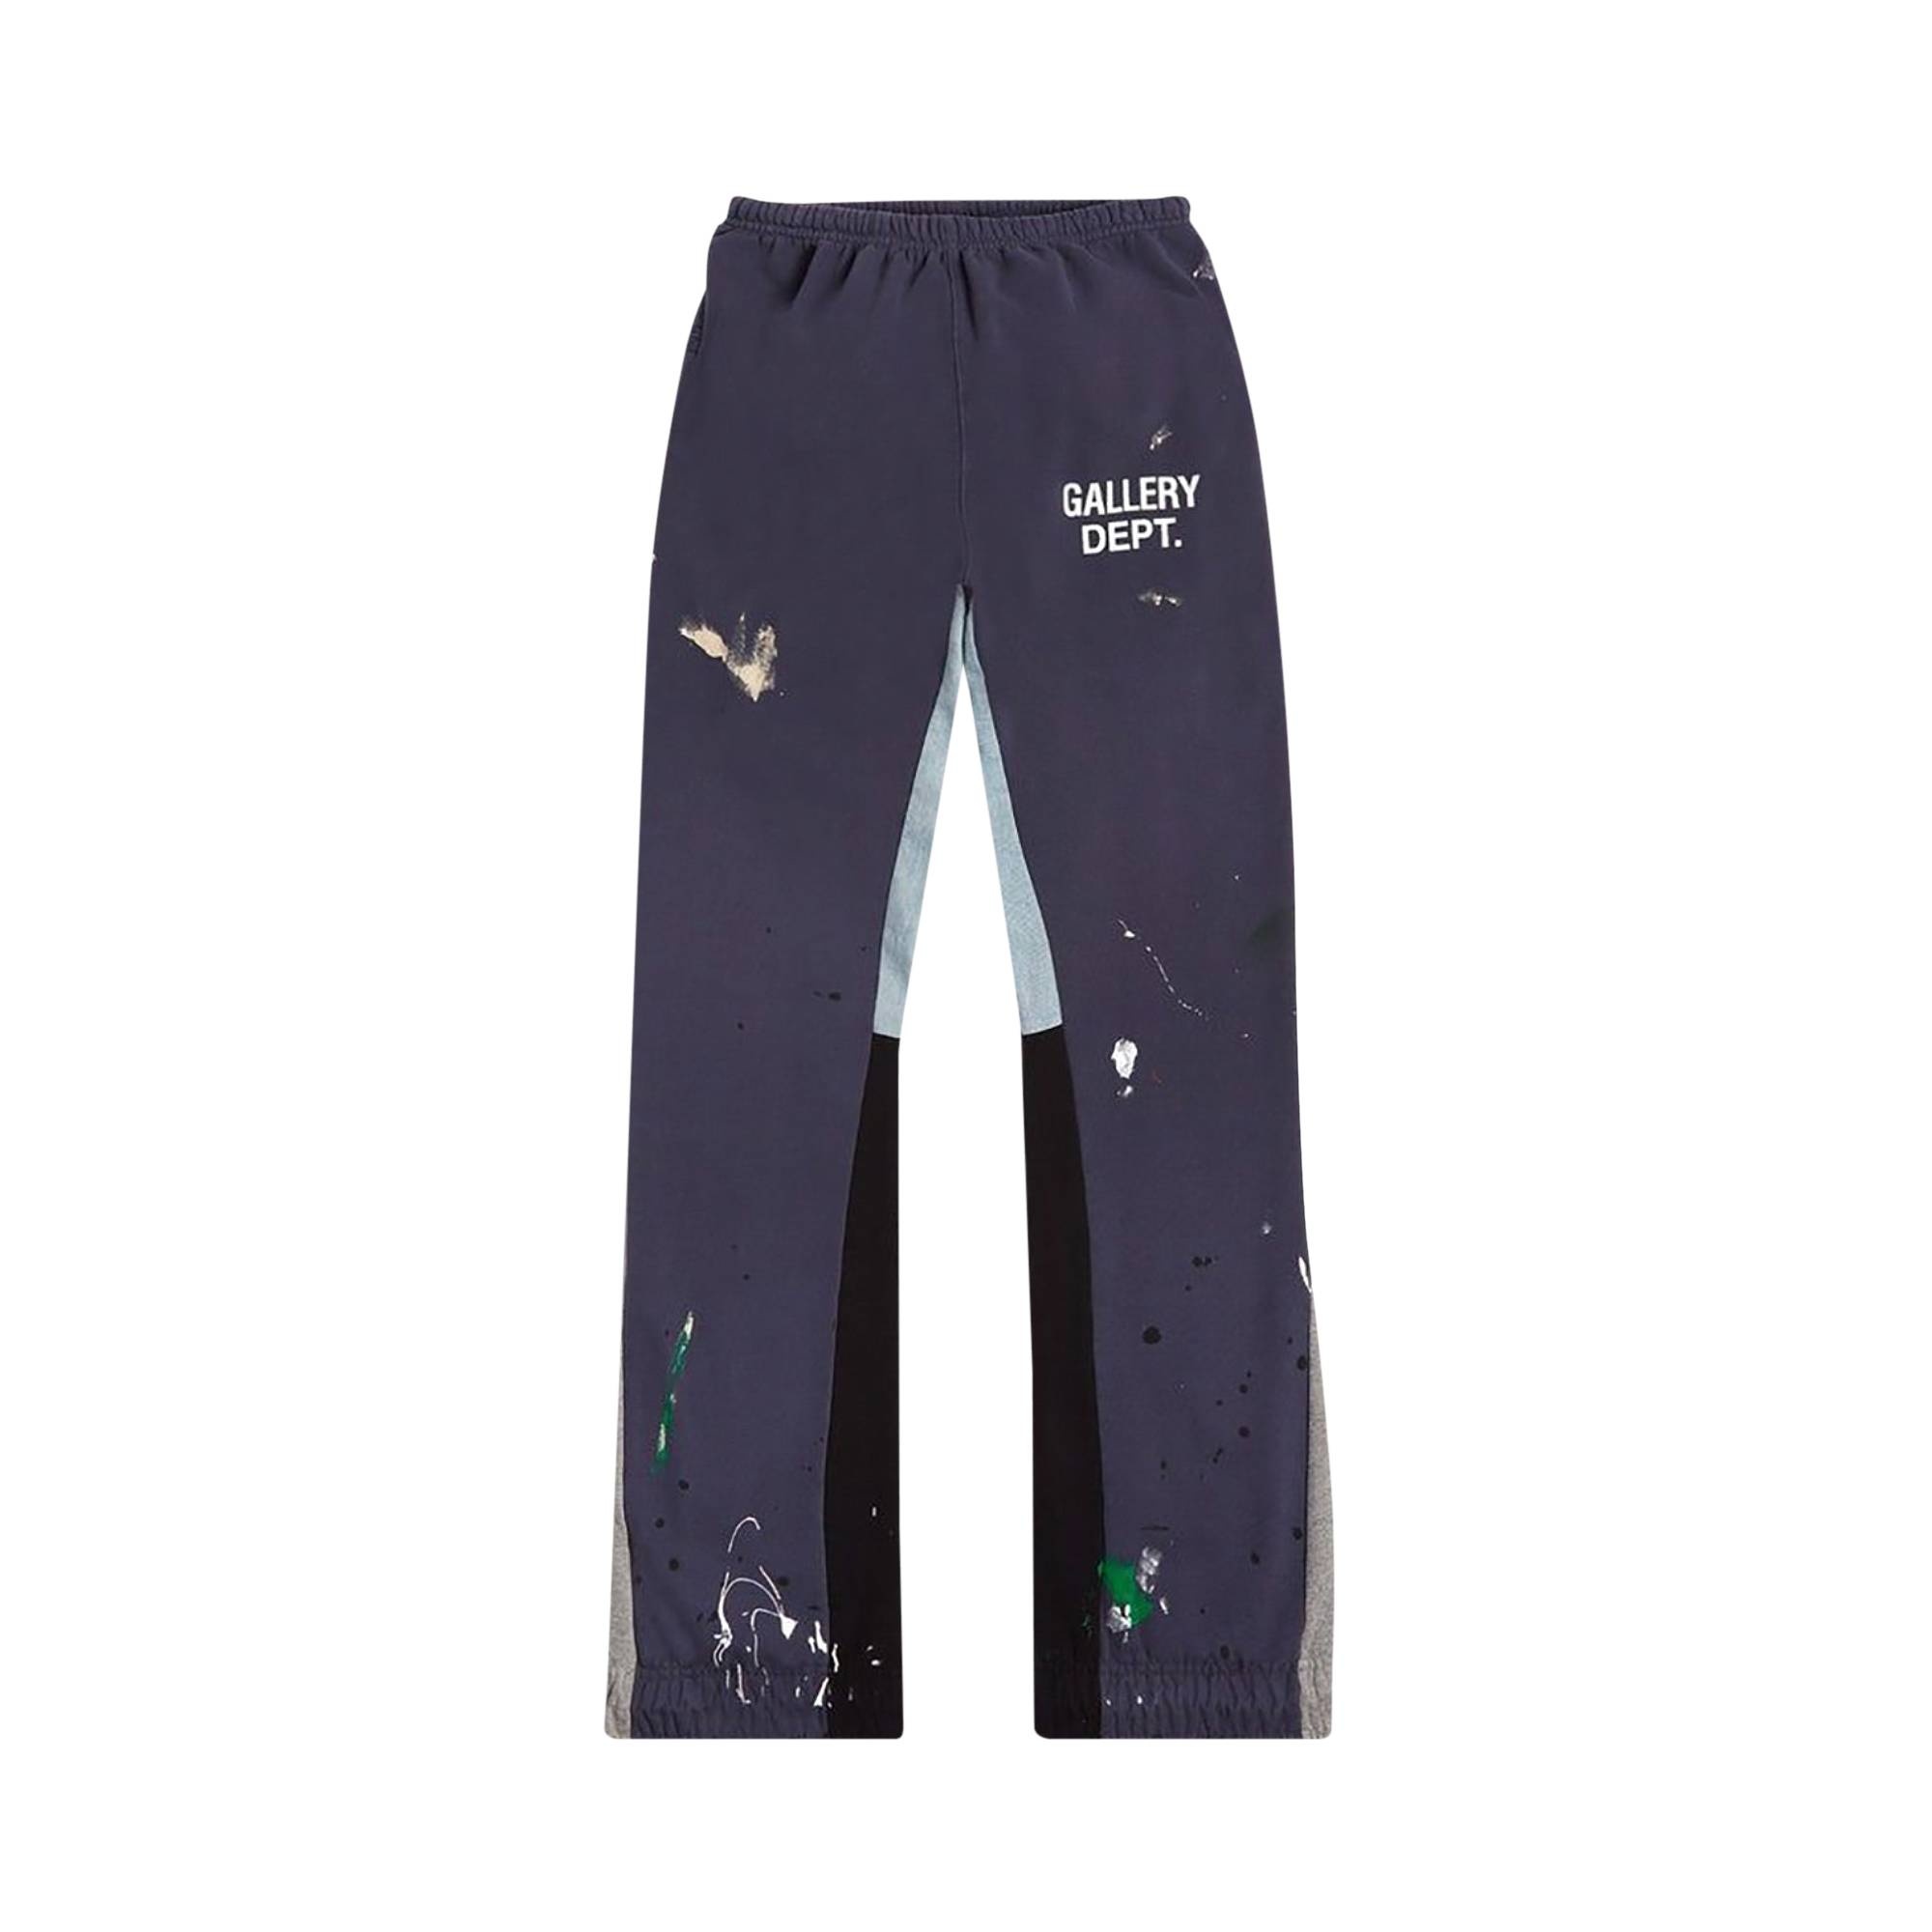 Gallery Dept. GD Flared Sweatpant 'Navy' - 1